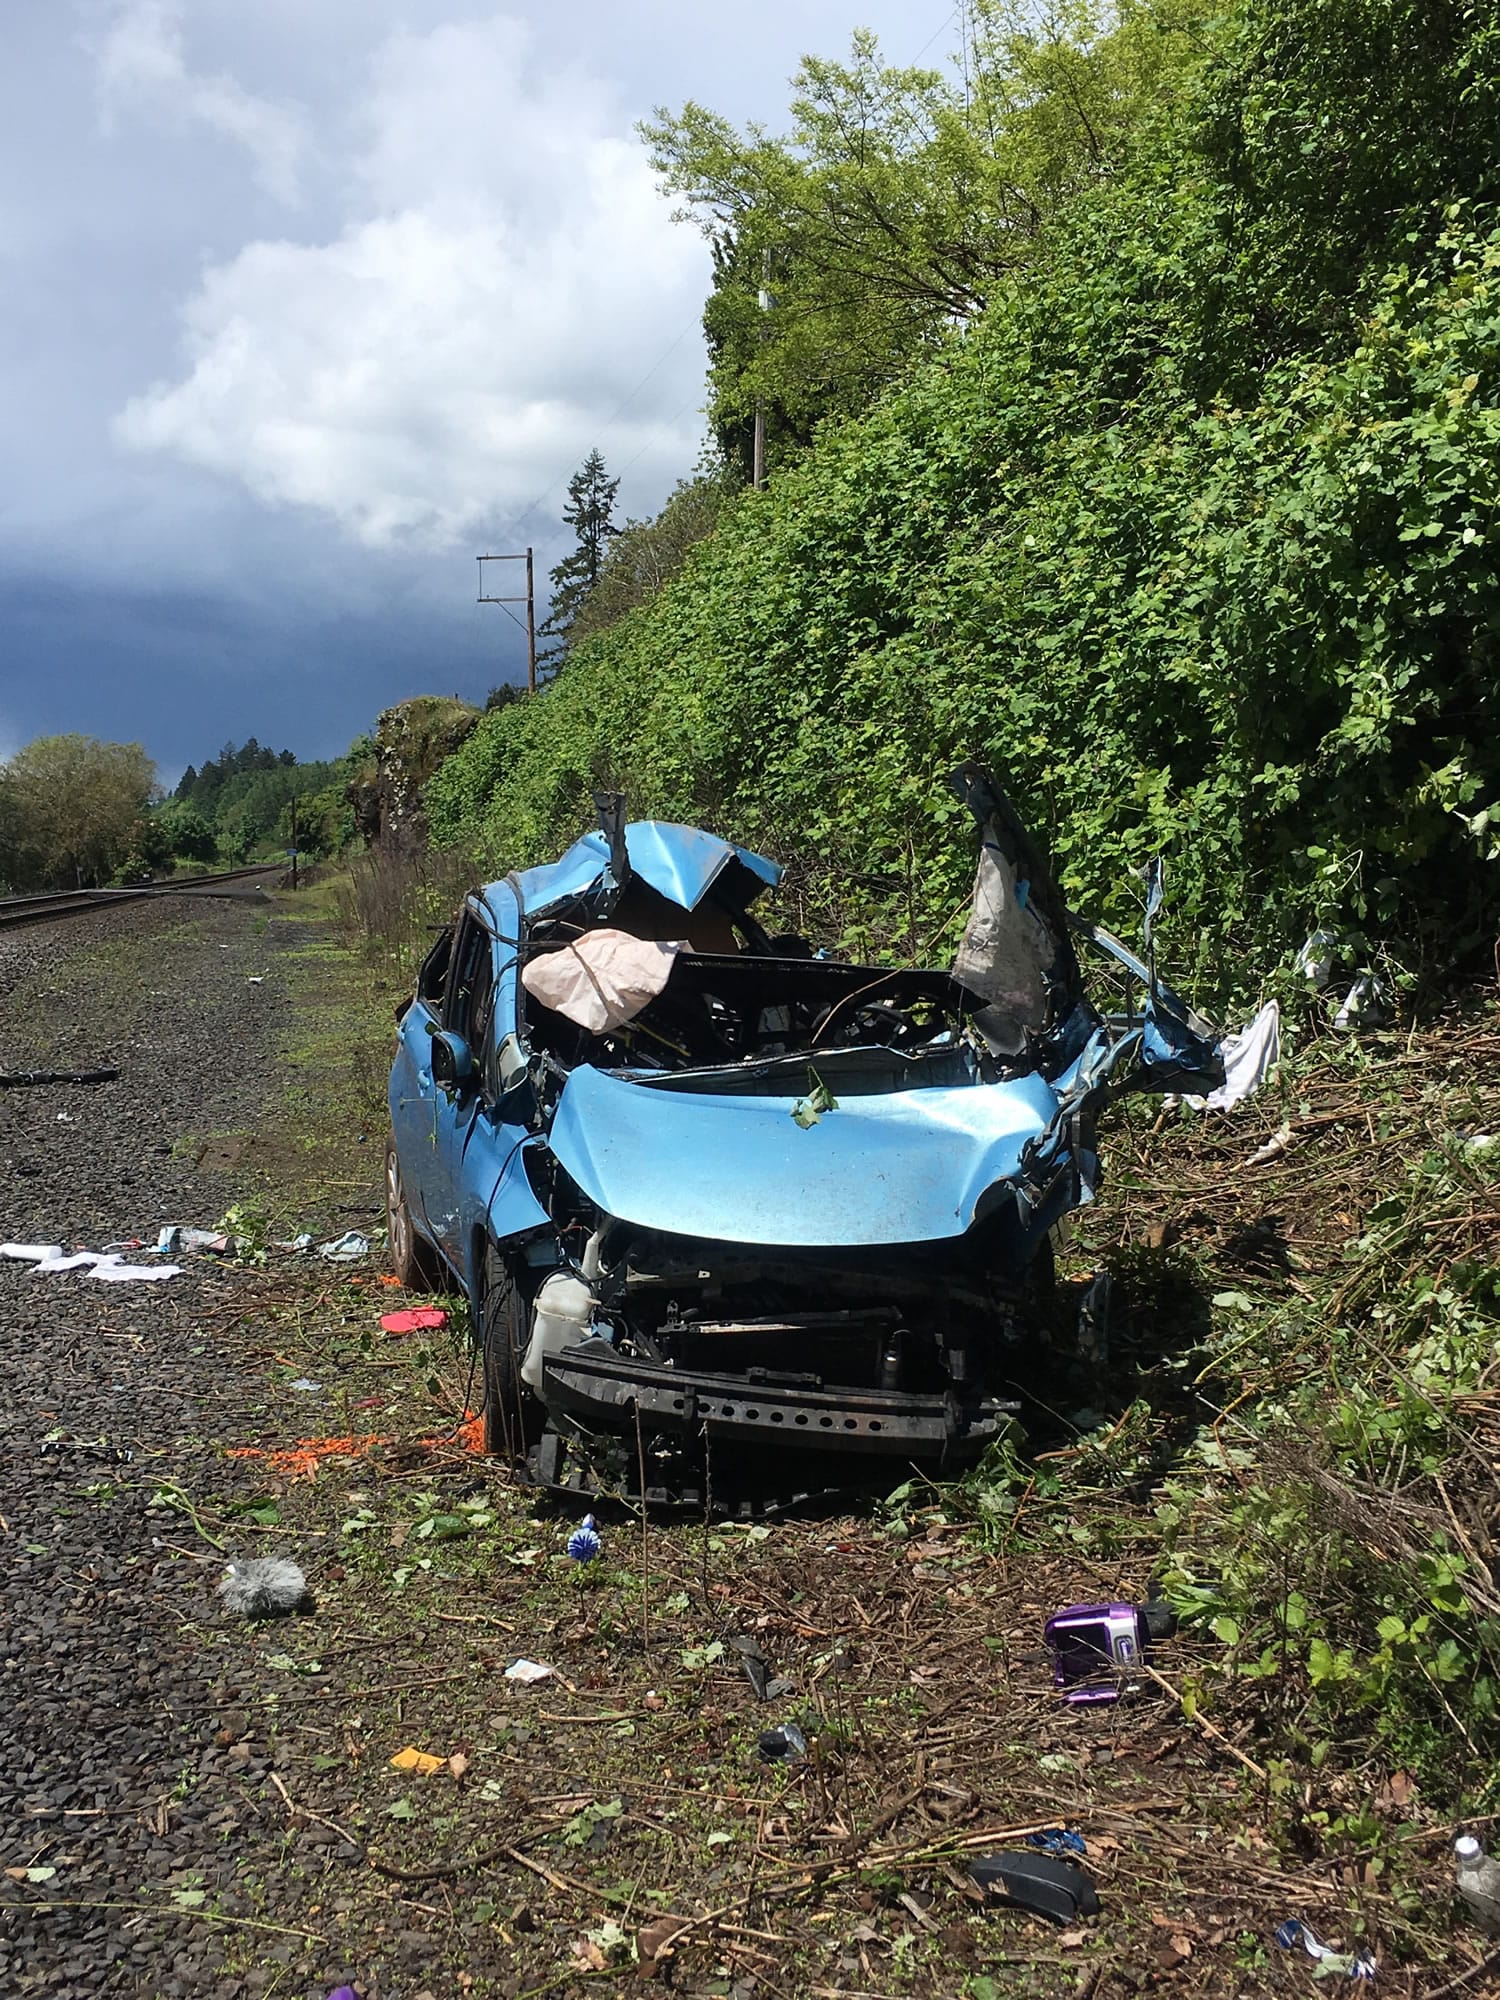 A woman died when this vehicle and a train collided Tuesday morning. Camas police said the driver of the vehicle, which was traveling south on Southwest Viola Street, ran a stop sign prior to the collision.